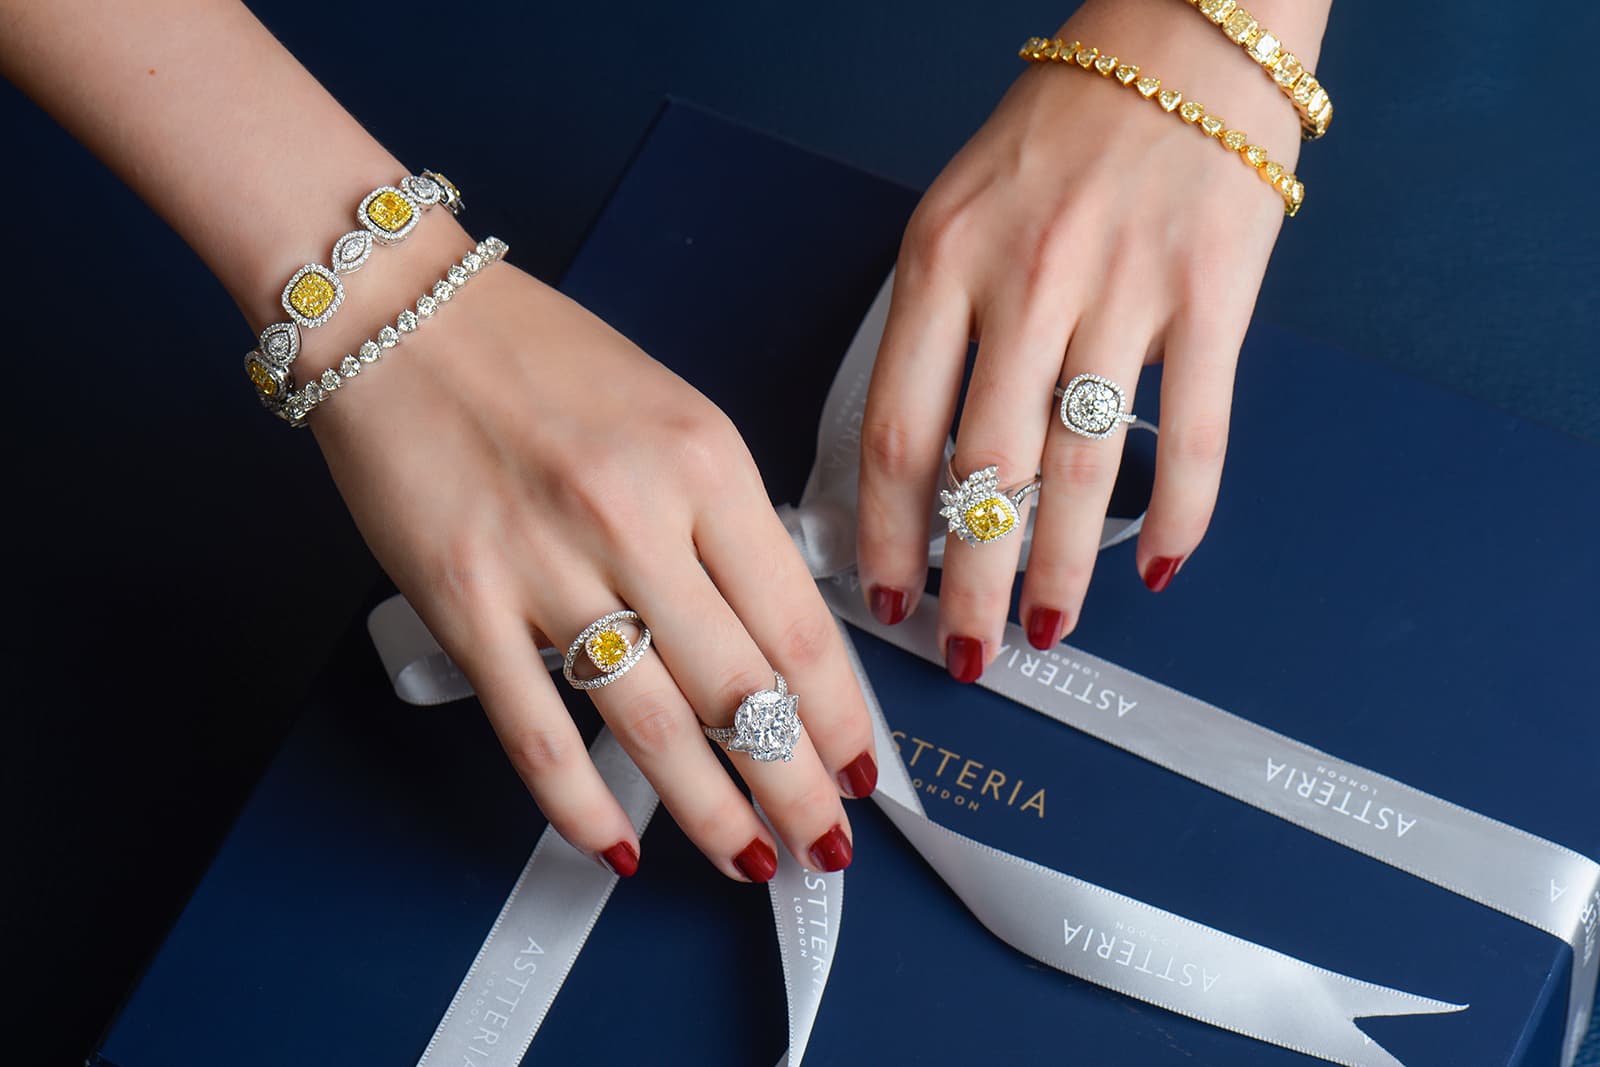 A selection of yellow and white diamond cocktail rings and bracelets by Astteria